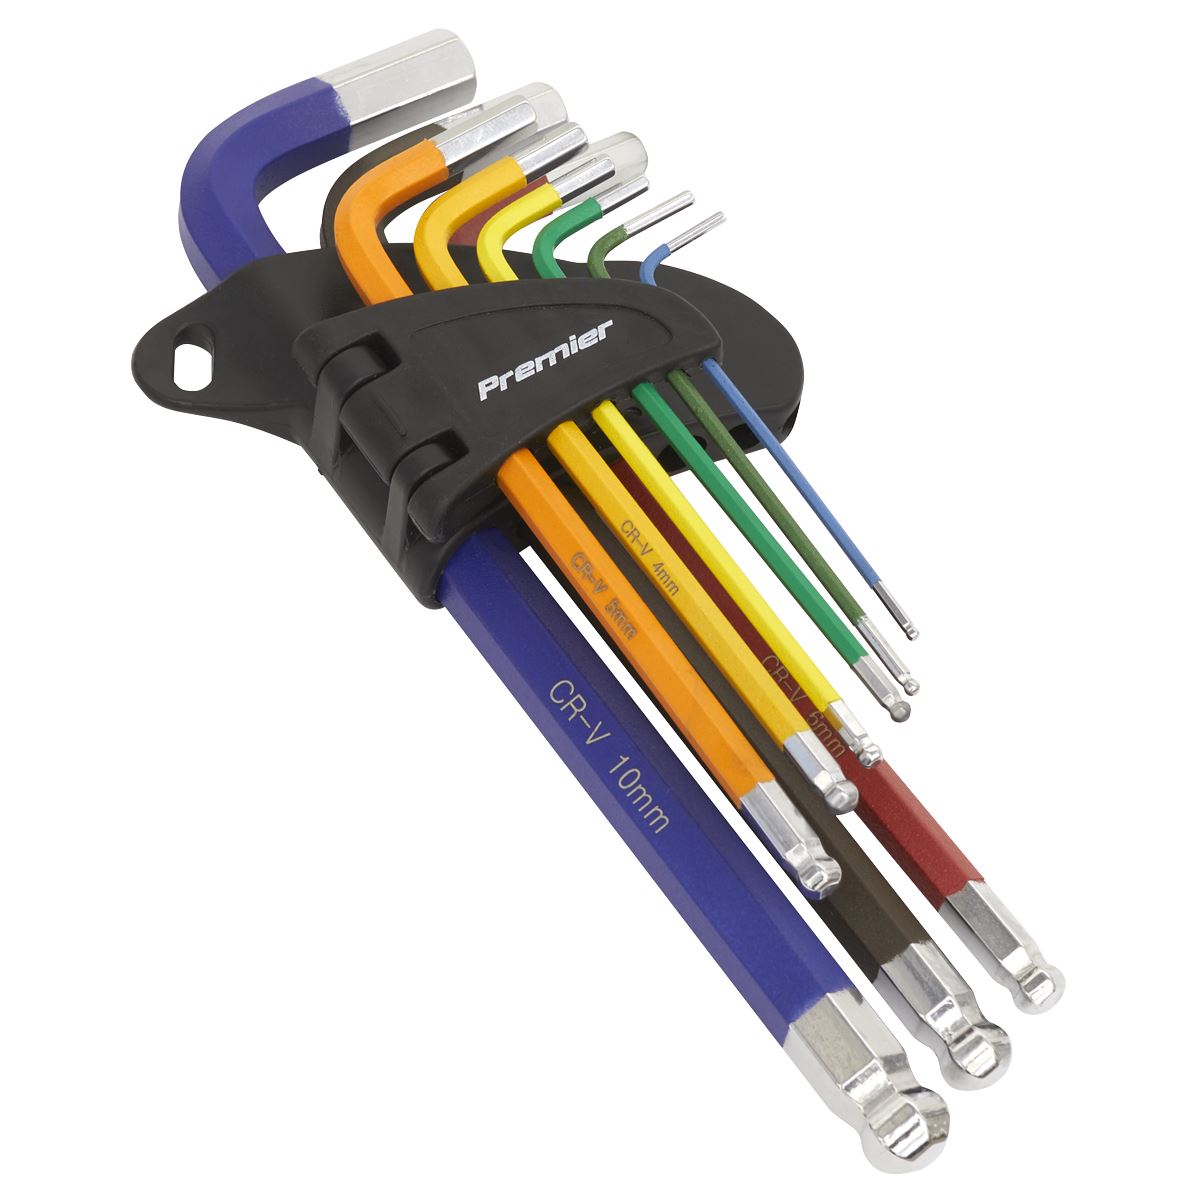 Sealey Premier 9 Piece Colour Coded Long Ball End Hex Key Set 1.5-10mm Metric